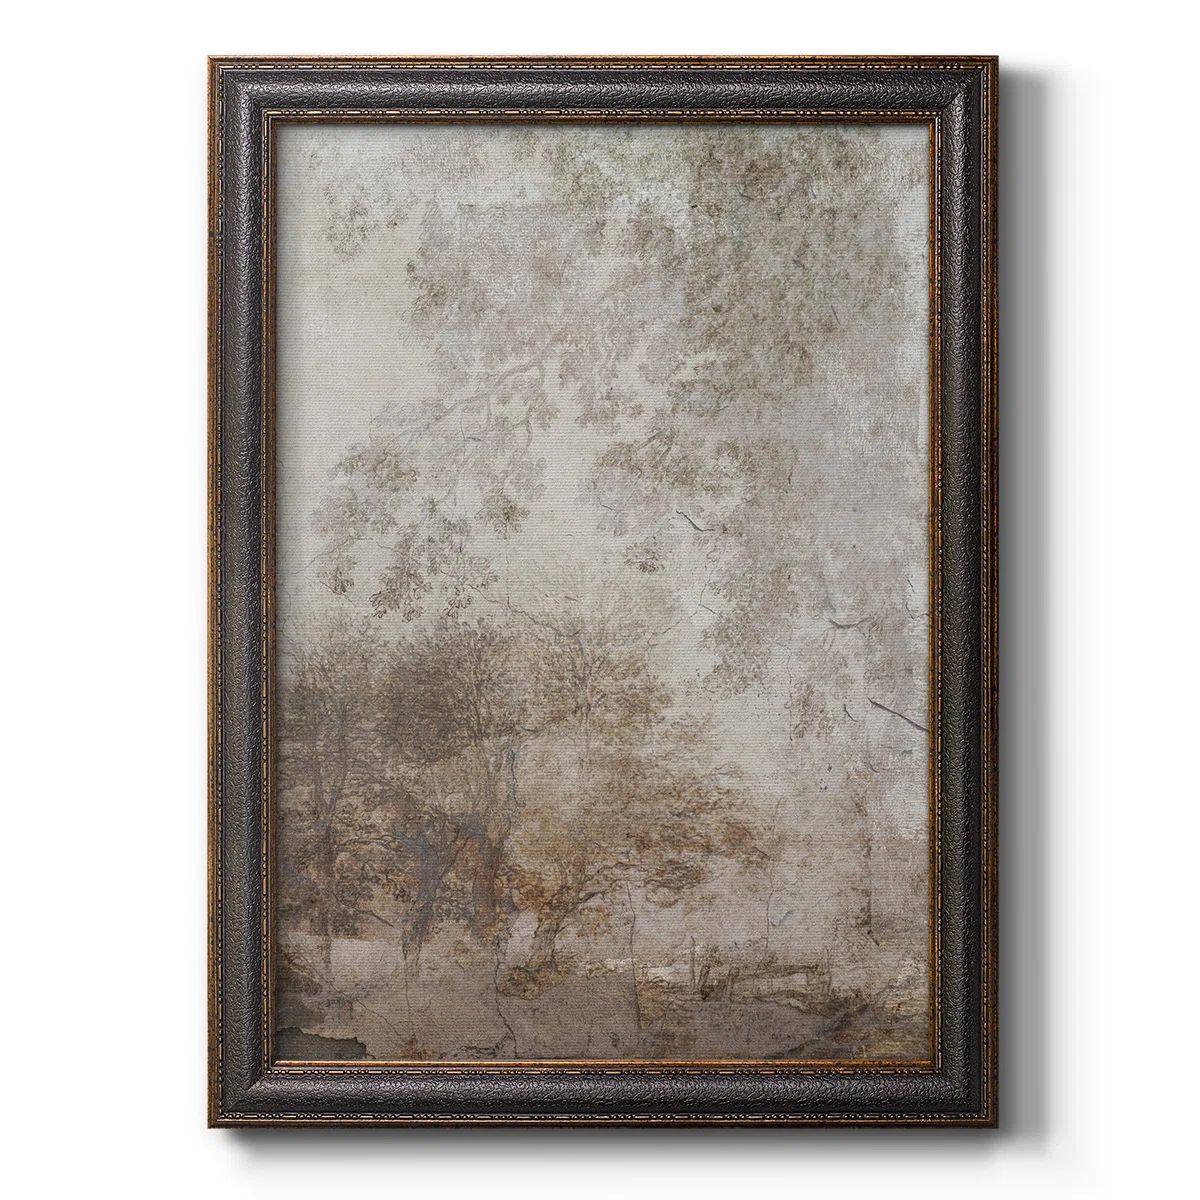 Fresco Collage I Framed On Canvas Painting | Wayfair North America